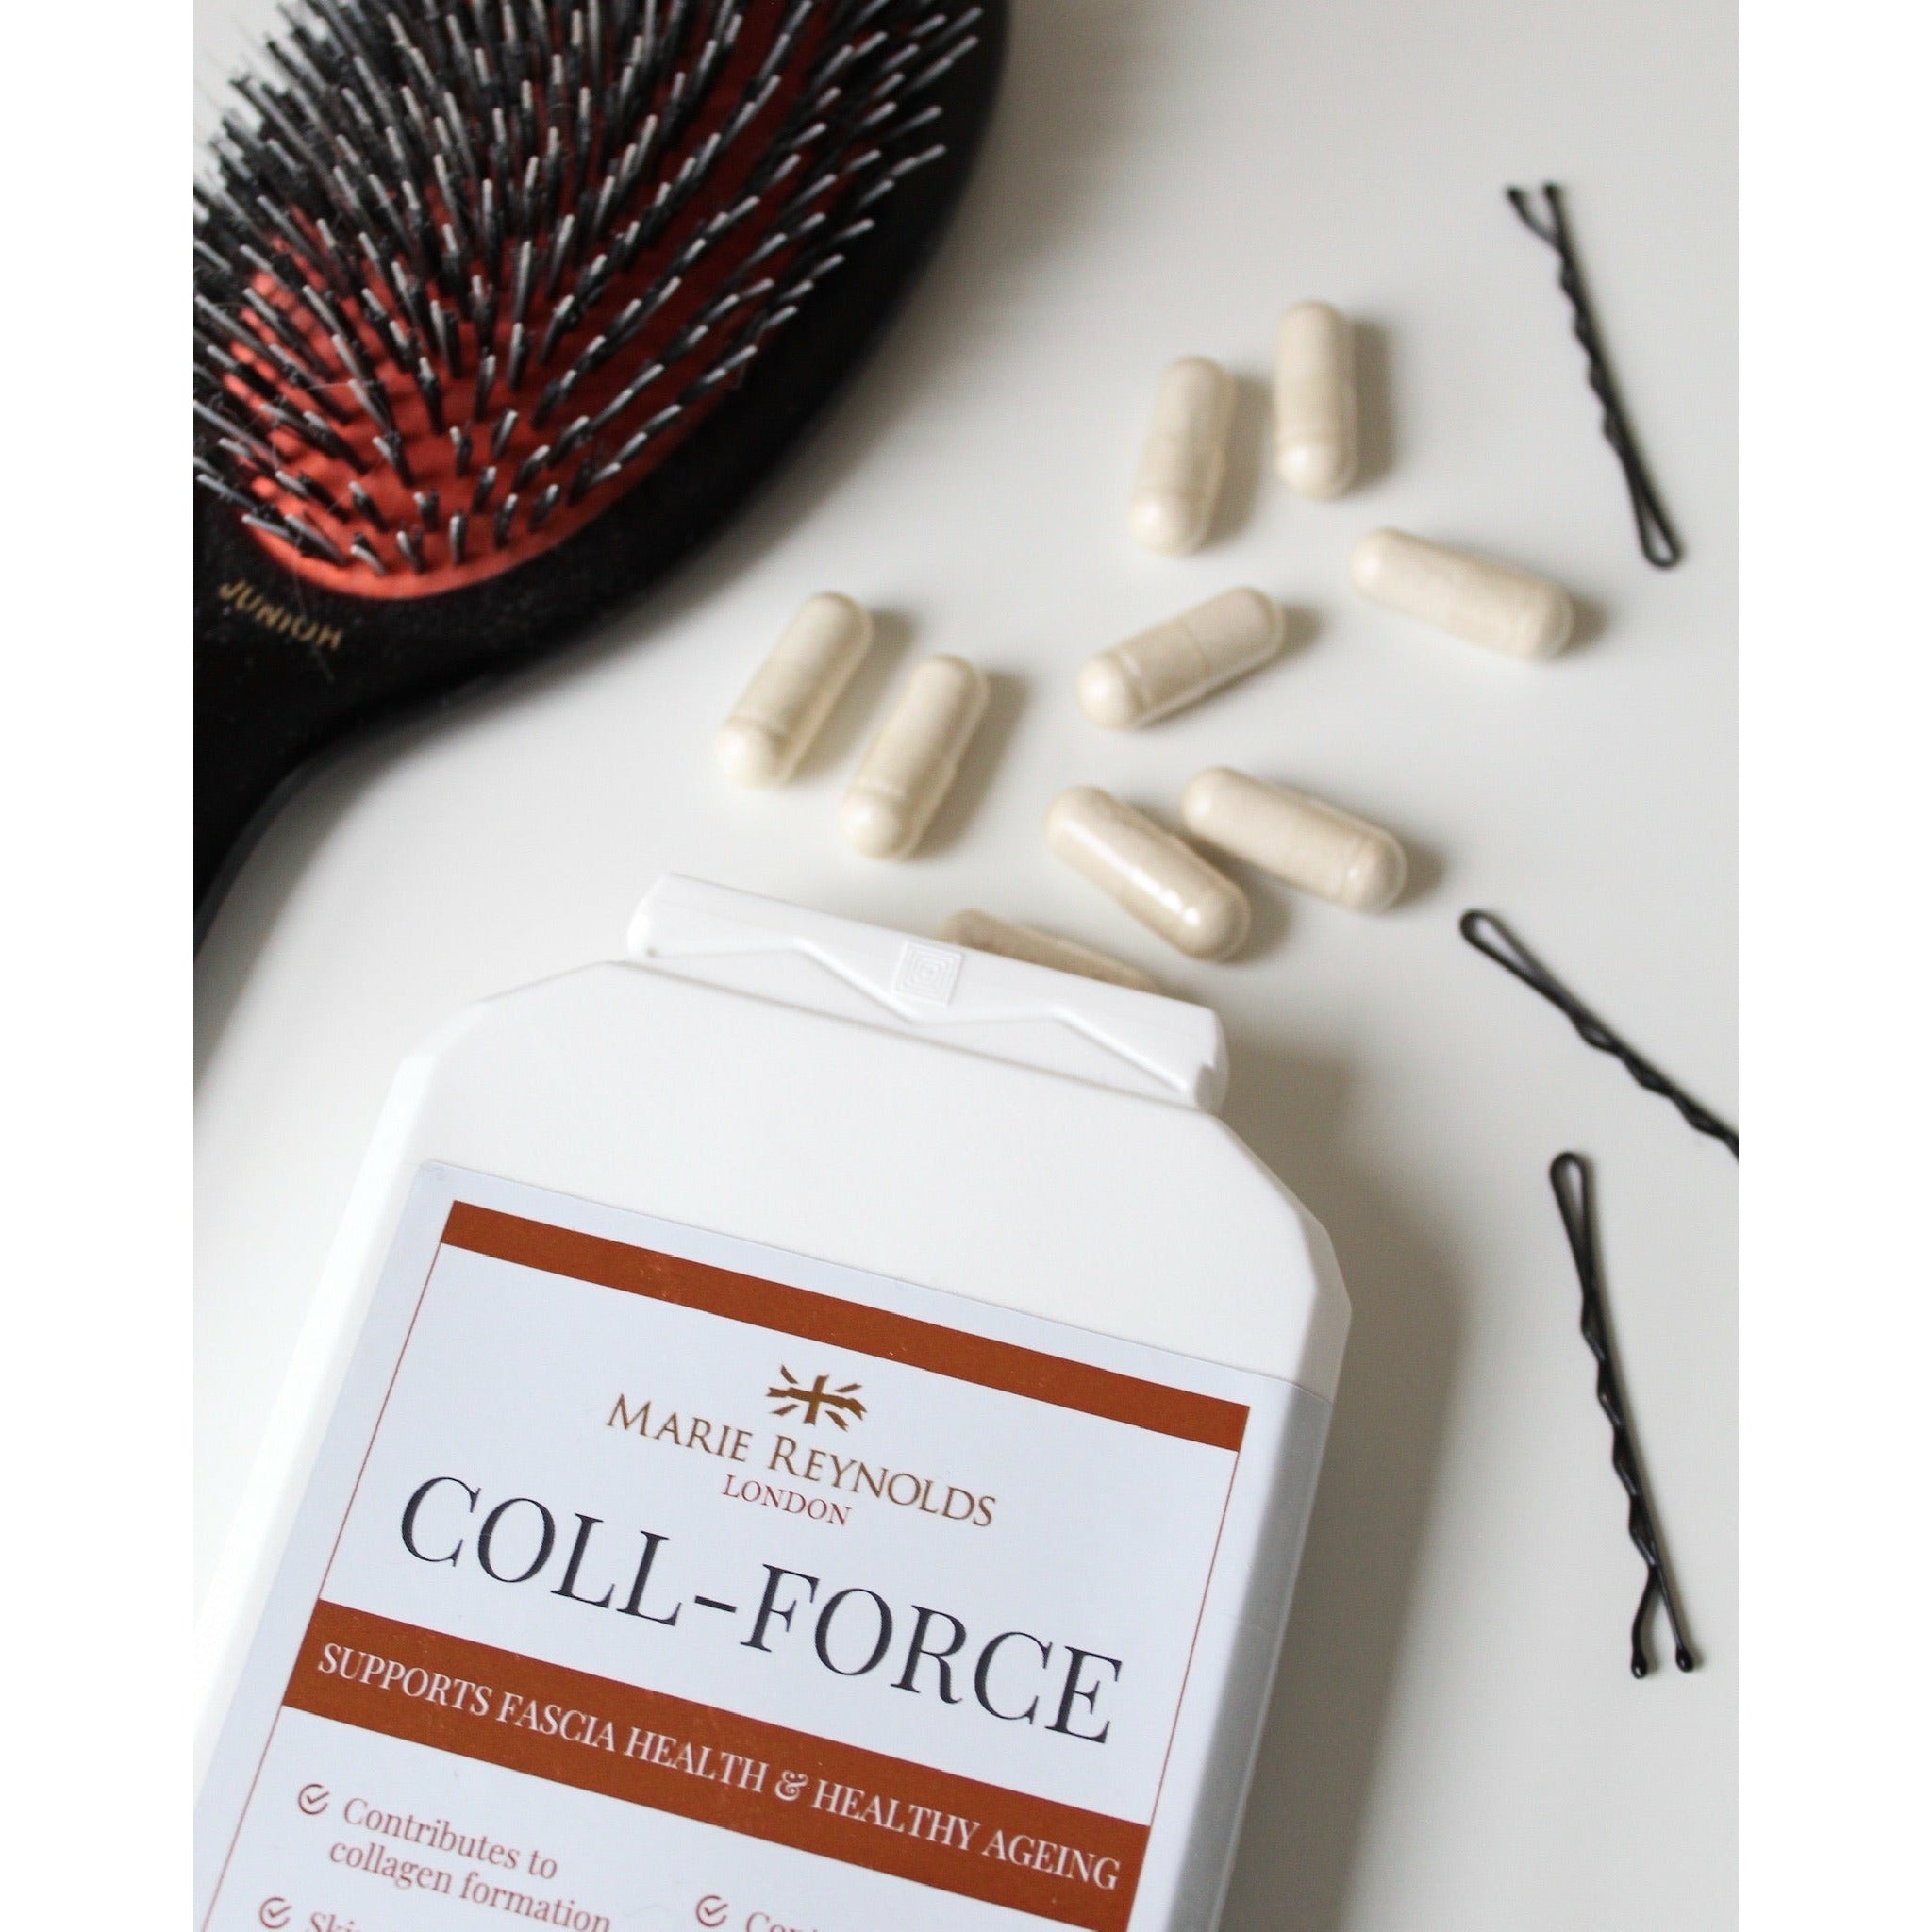 Coll-Force